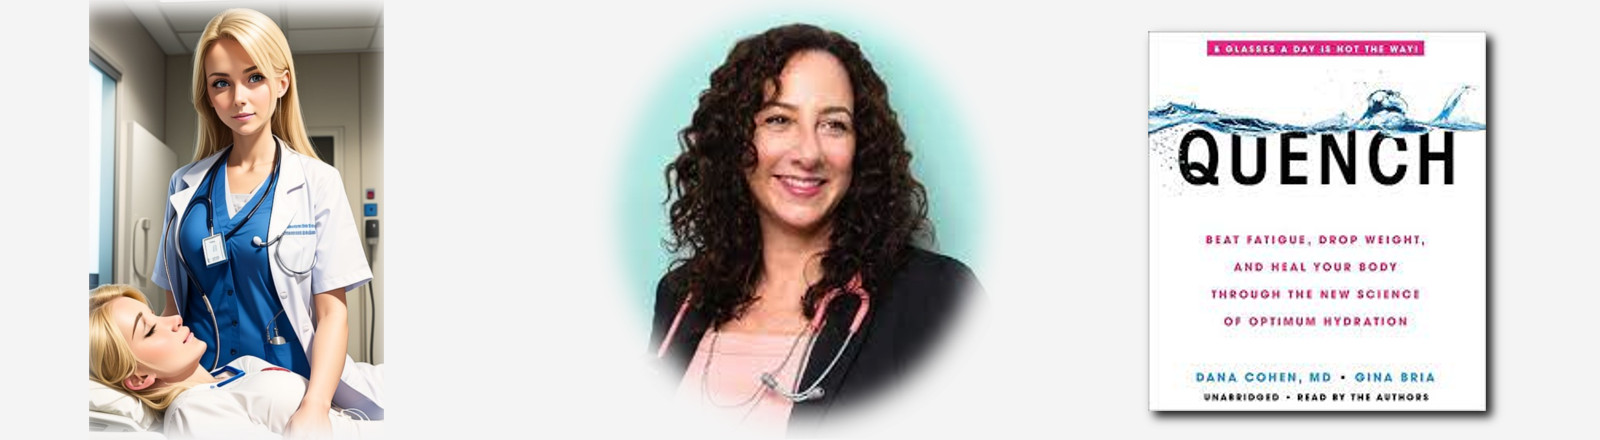 breaking the silence on overlooked women's health with dana cohen md